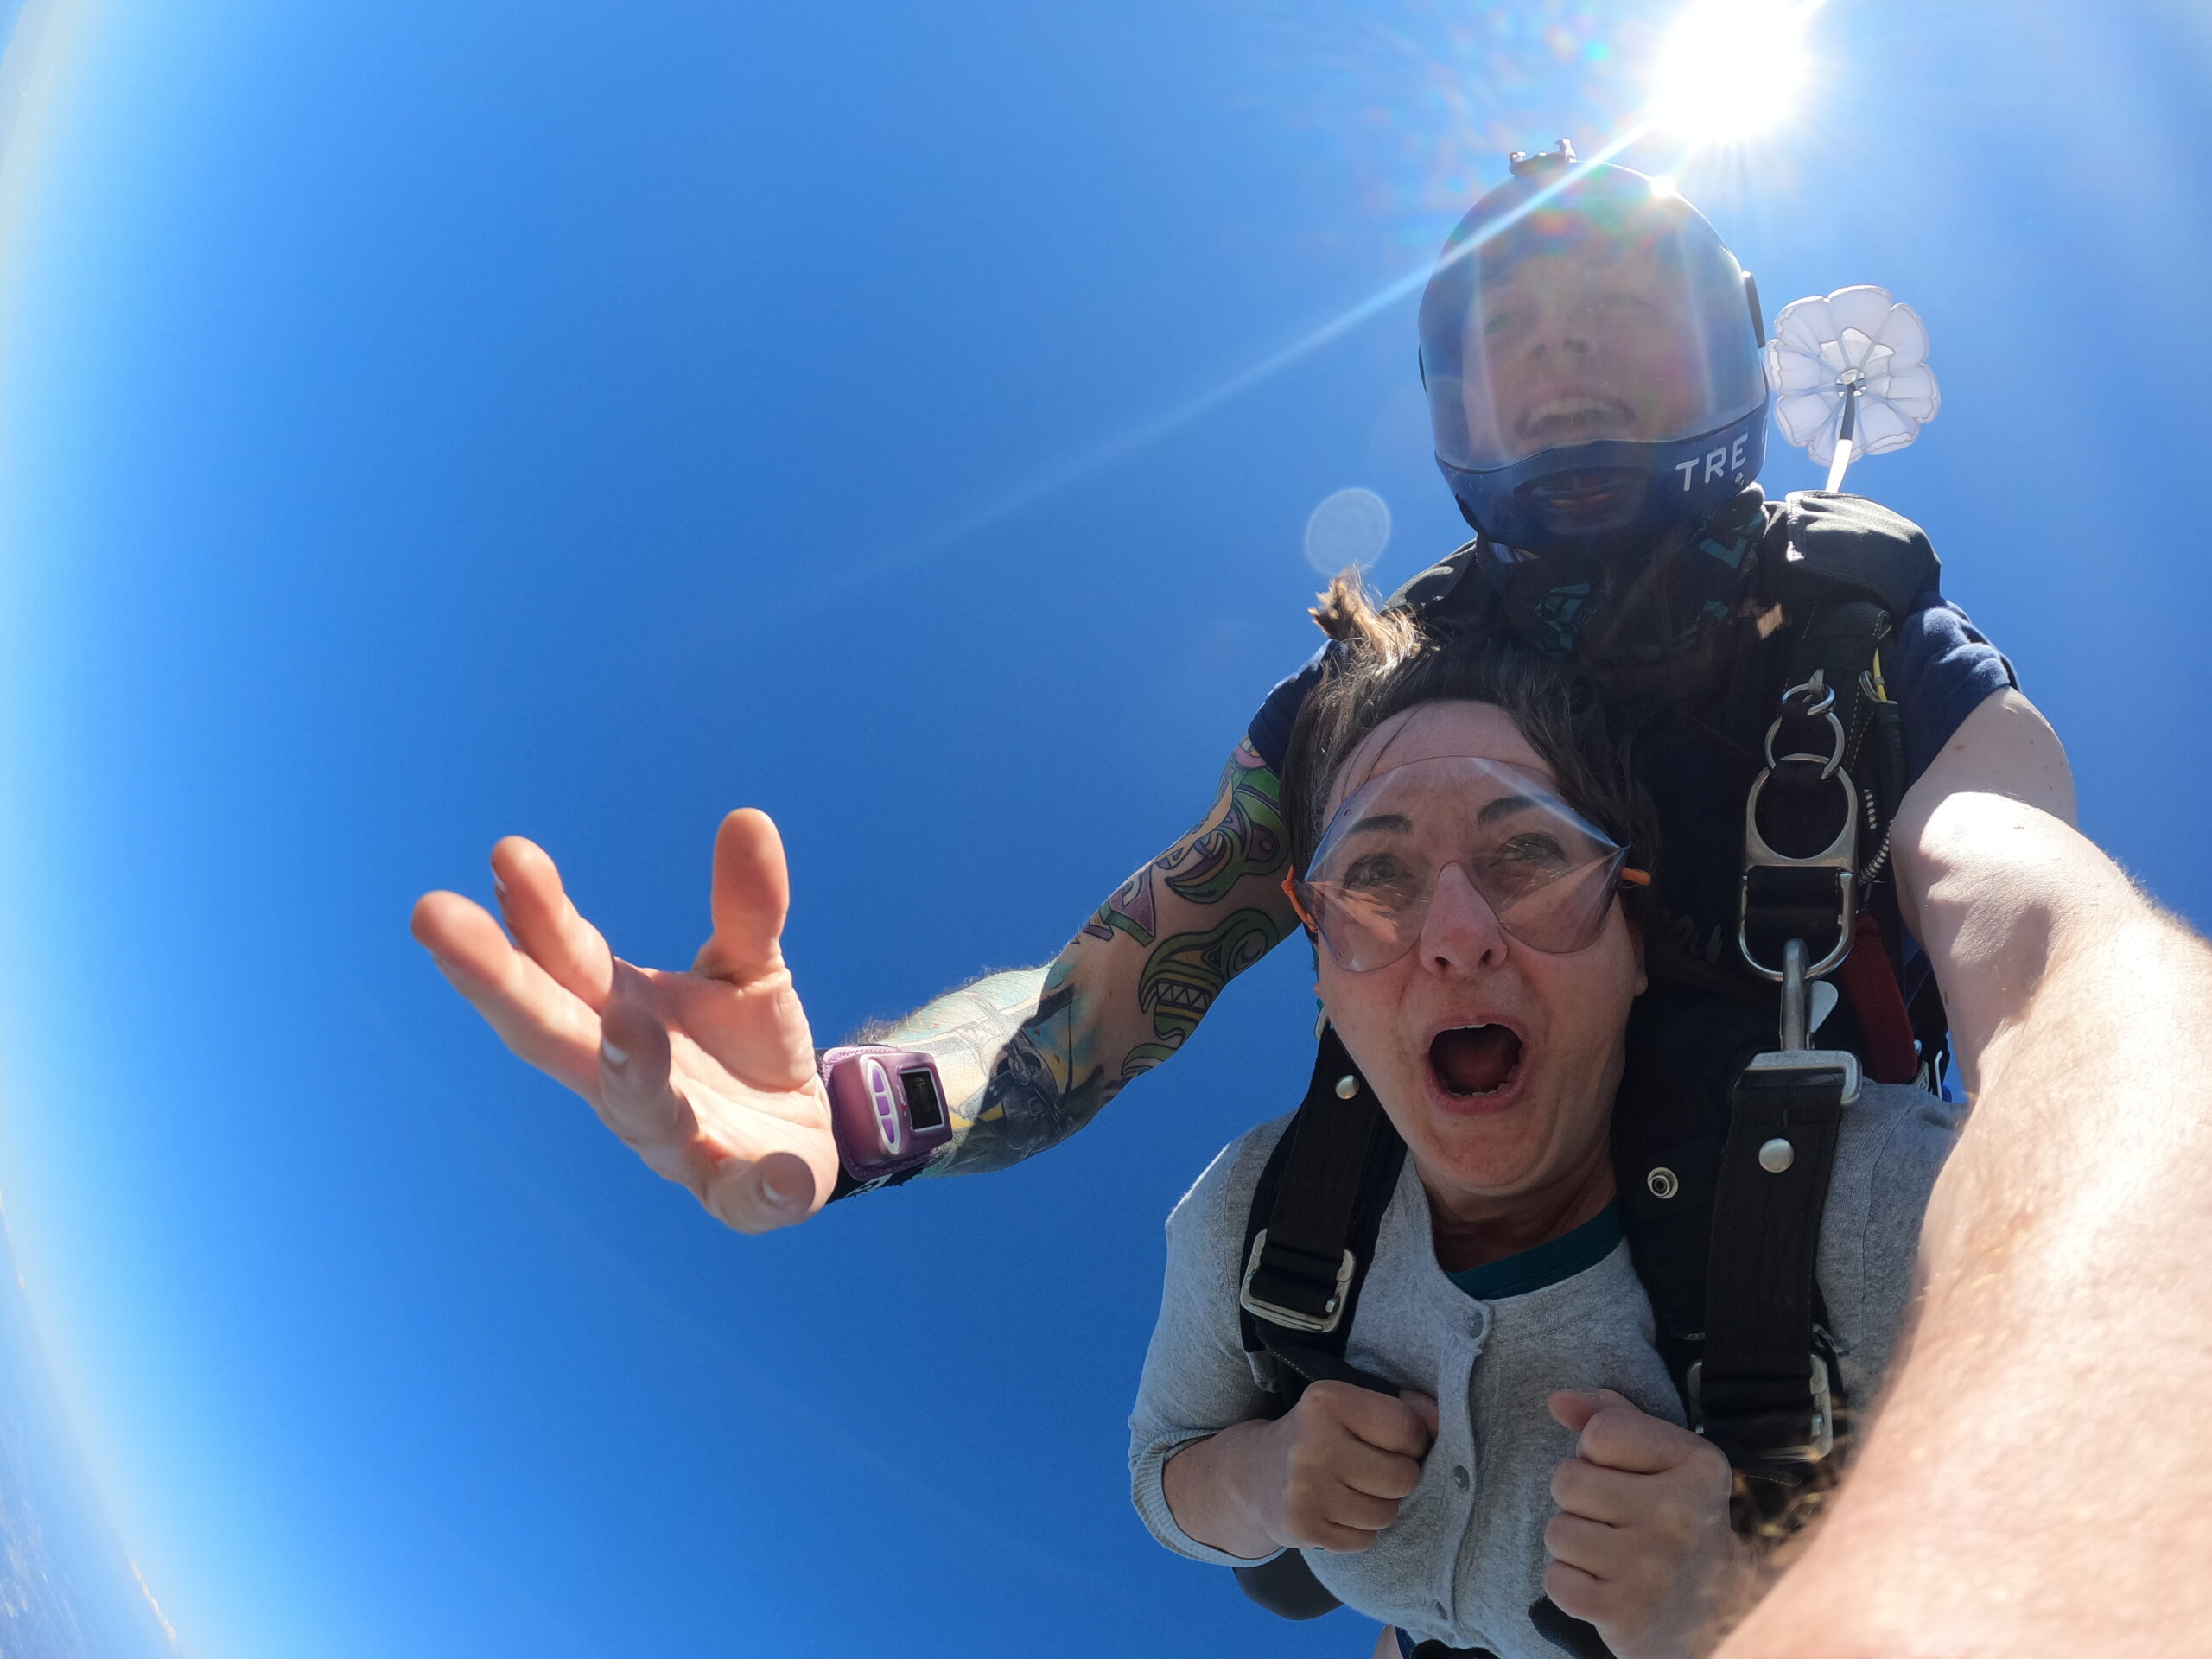 Guy and gal tandem skydiving with blue sky background.